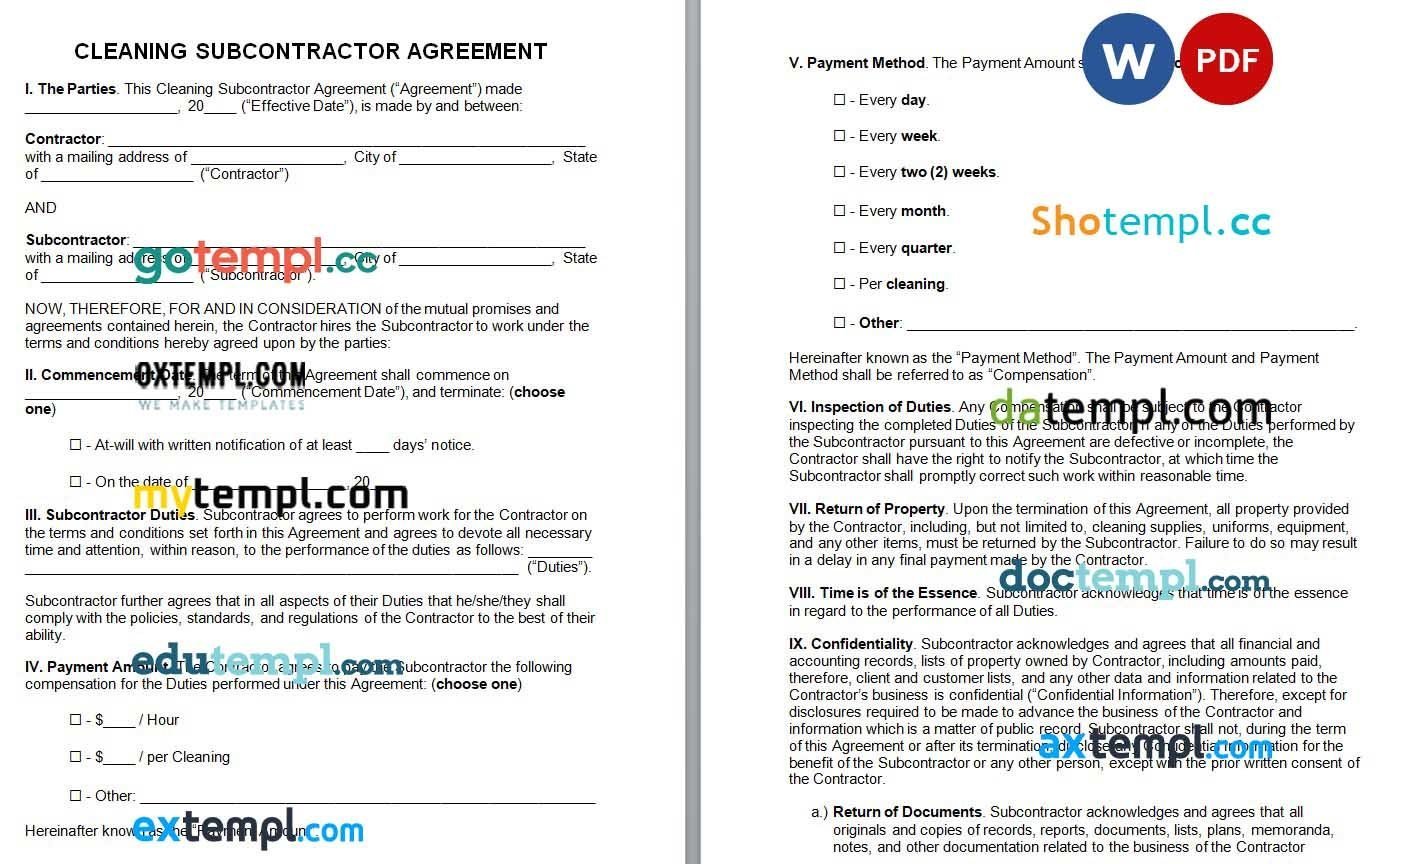 Cleaning Subcontractor Agreement Word example, fully editable